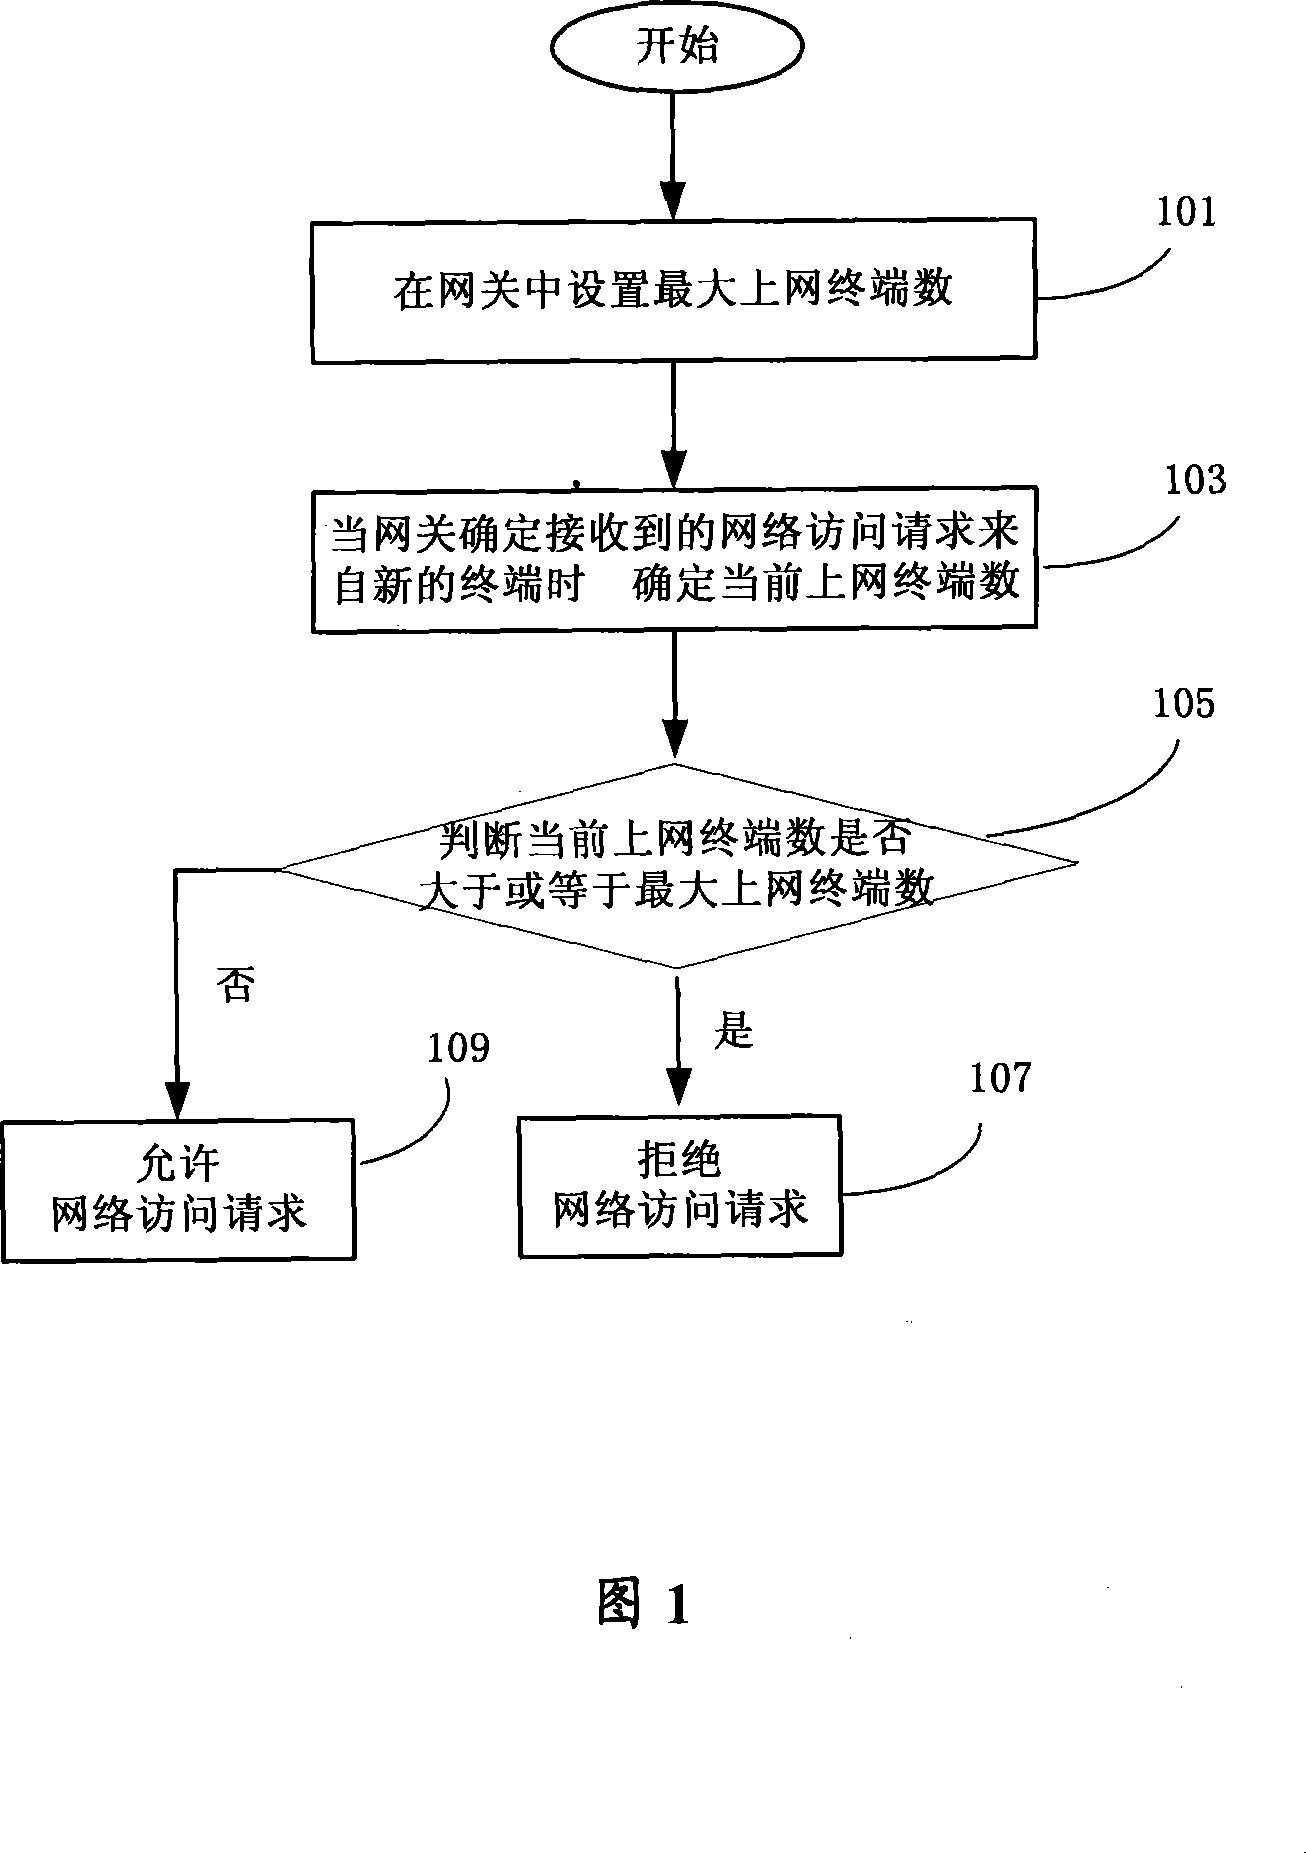 A method, system and gateway for controlling quantity of network access terminal under routing mode